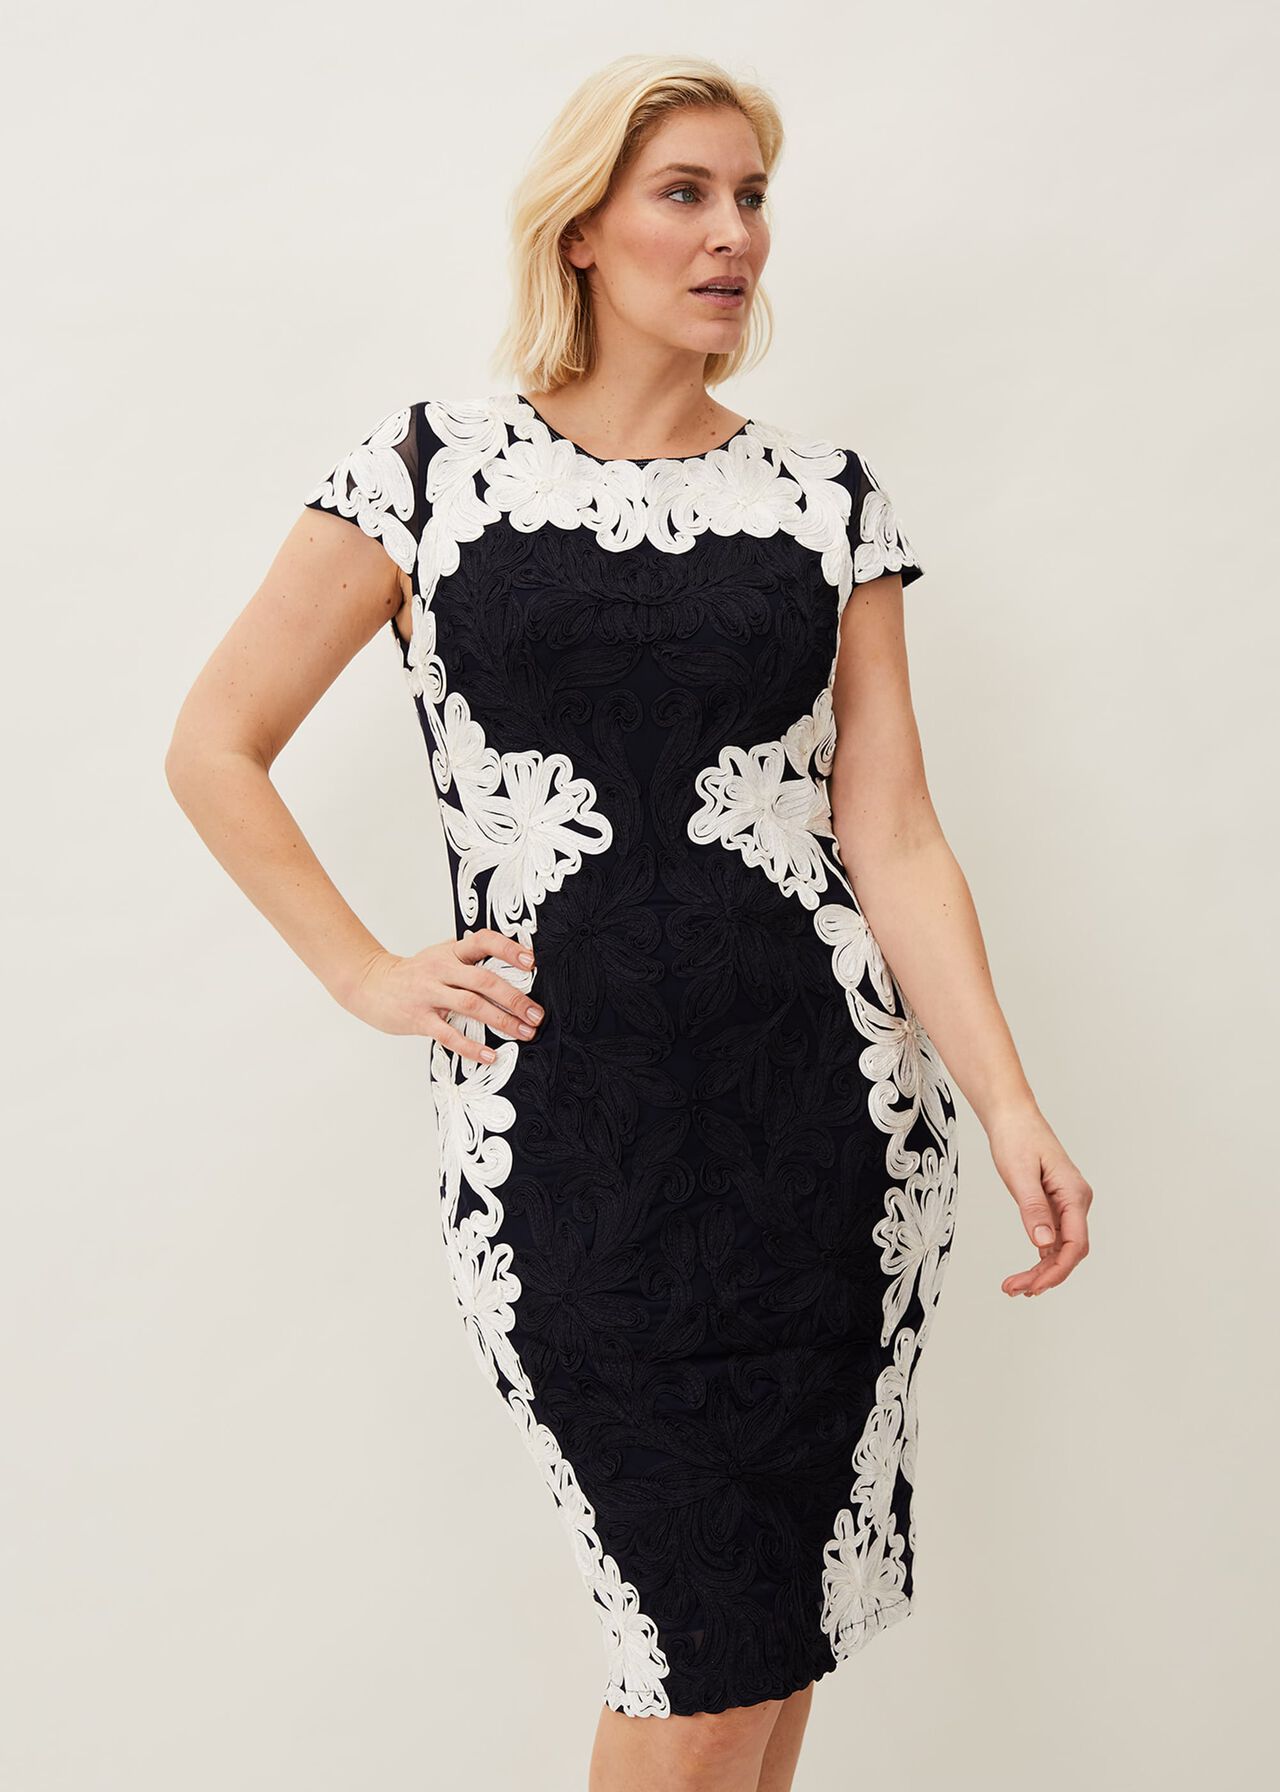 Nori Tapework Lace Fitted Dress | Phase Eight